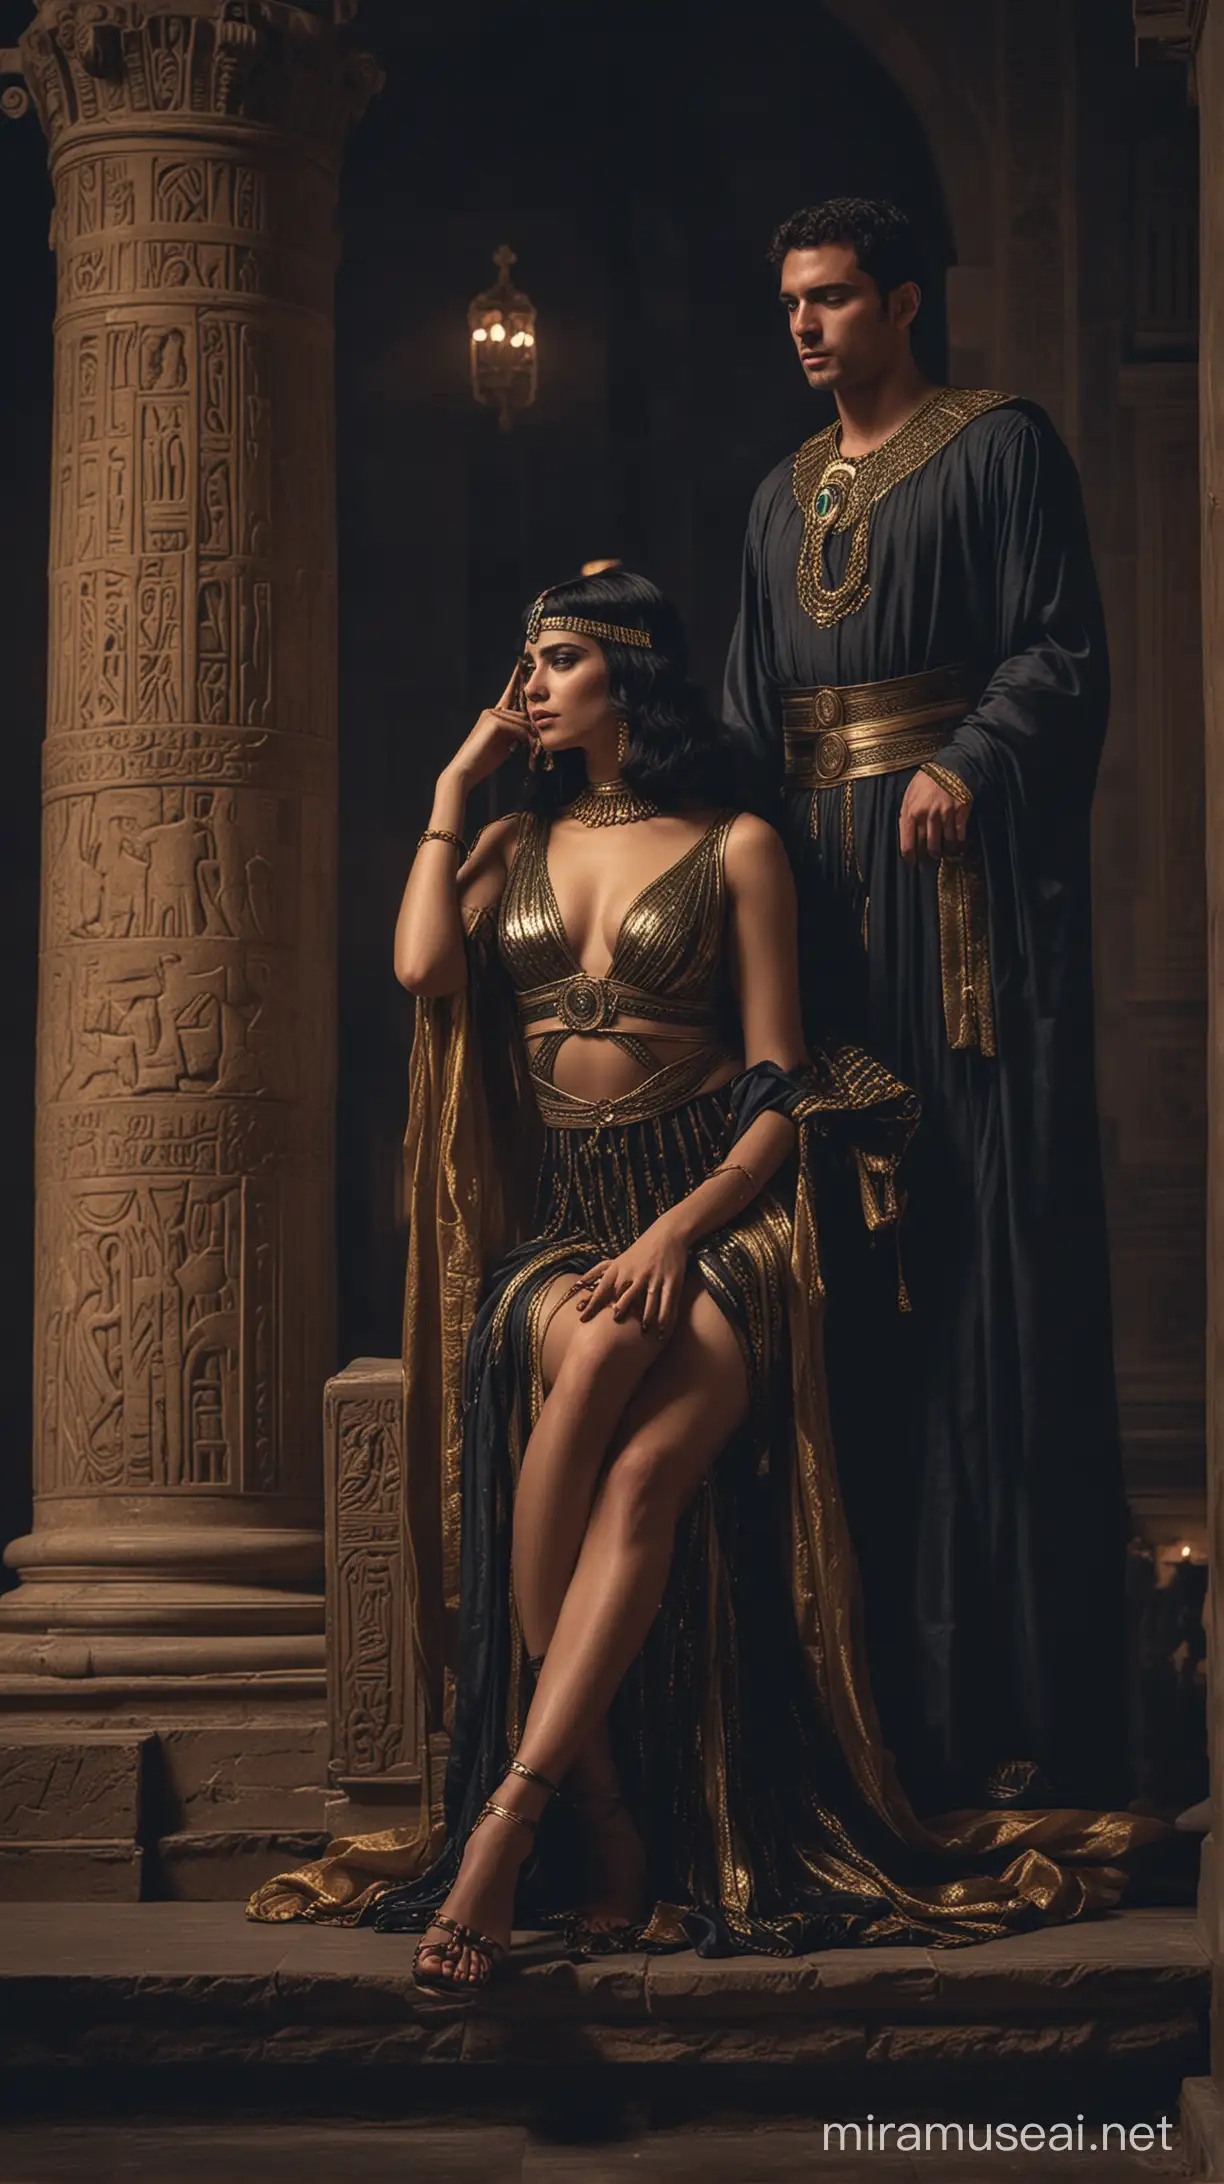 Cleopatra young romancing with a men siting in a moody attire in dark moody palace background